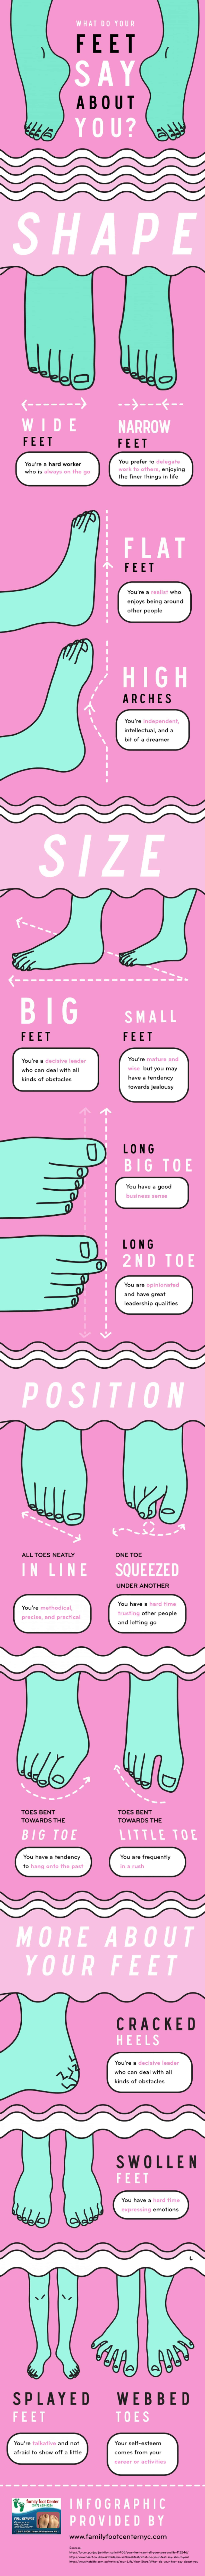 http://dailyinfographic.com/wp-content/uploads/2014/03/what-do-your-feet-say-about-you_5269fcbcf15d3_w1500.jpg